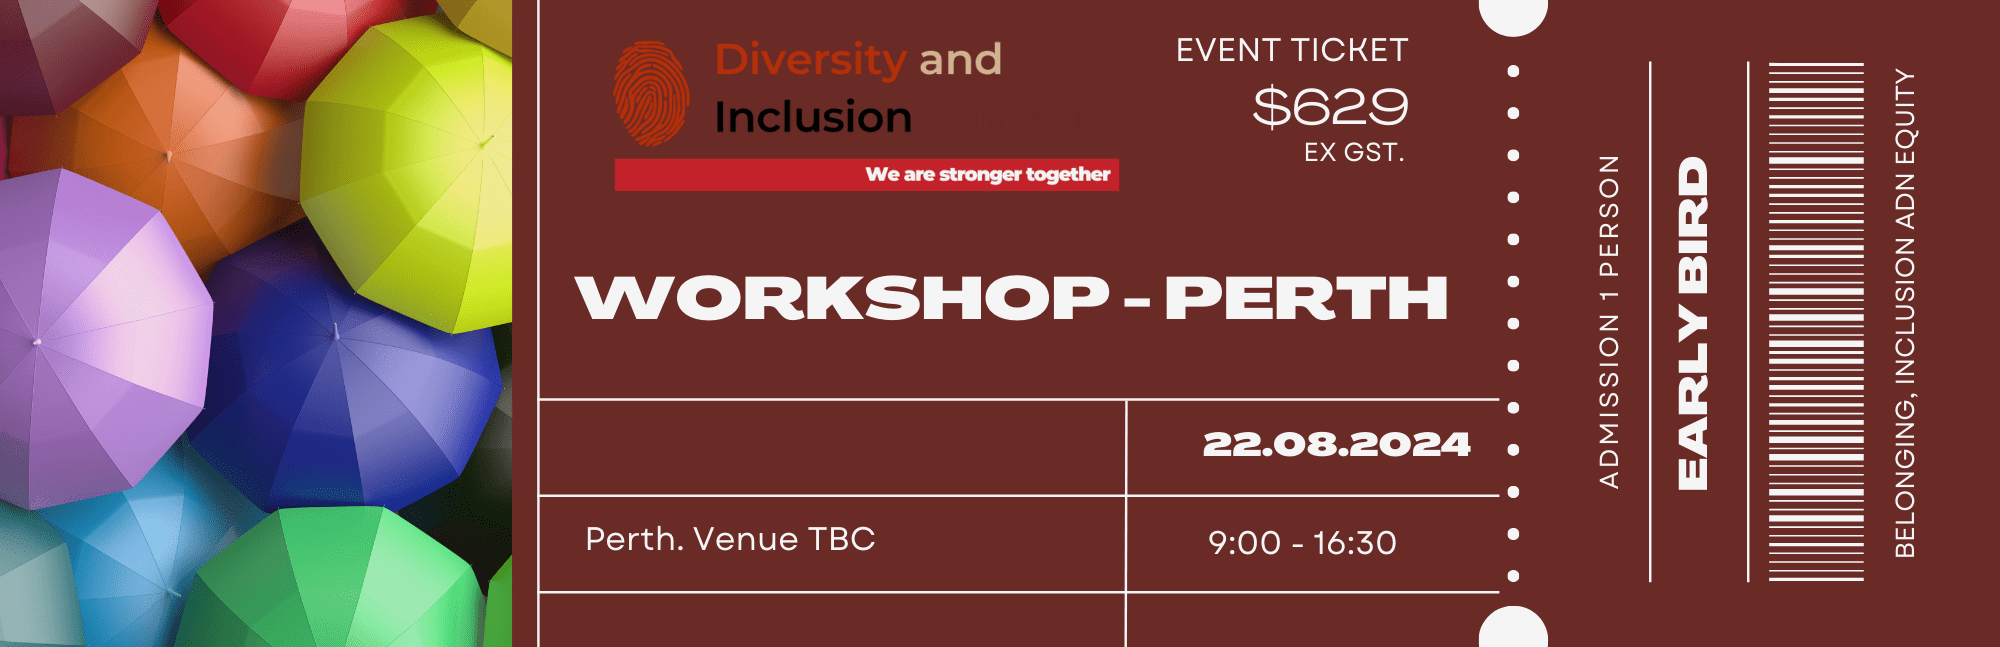 Perth Workshop 22 August 2024 Single Ticket Diversity And Inclusion